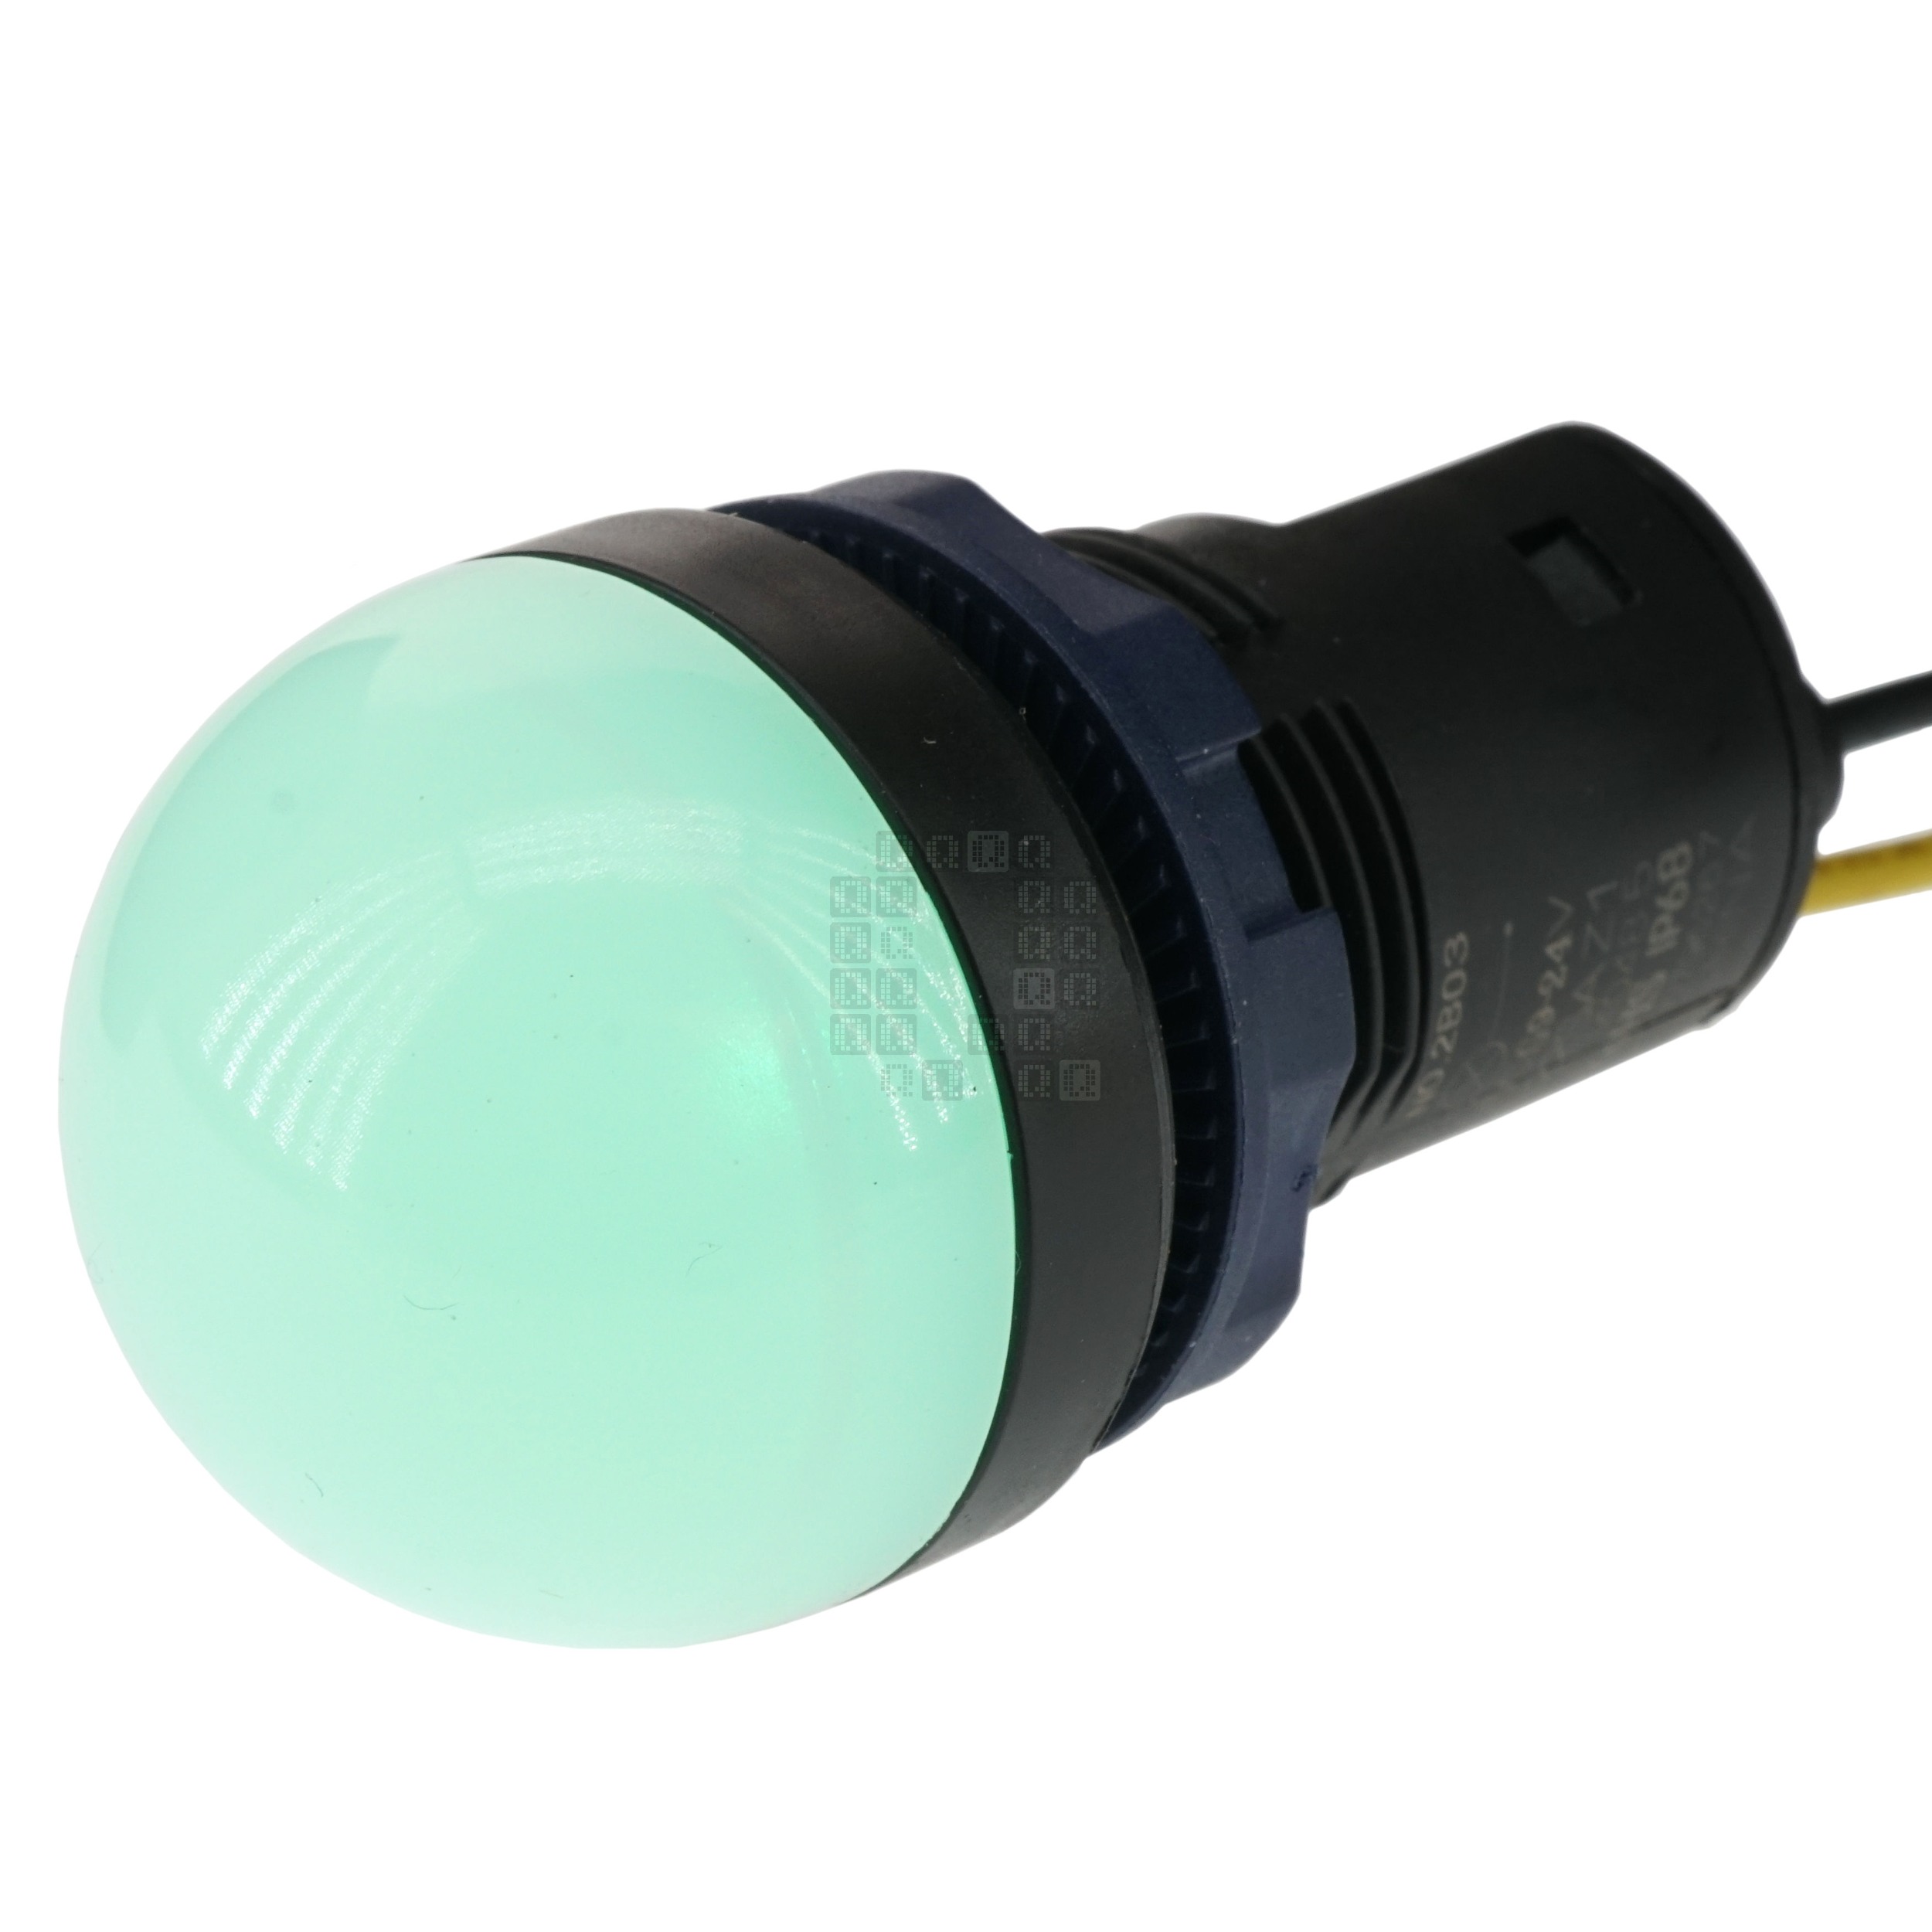 Lanboo 22mm Diffused Dome Panel Mount Green LED Indicator Light, 9-24VAC/DC, IP68